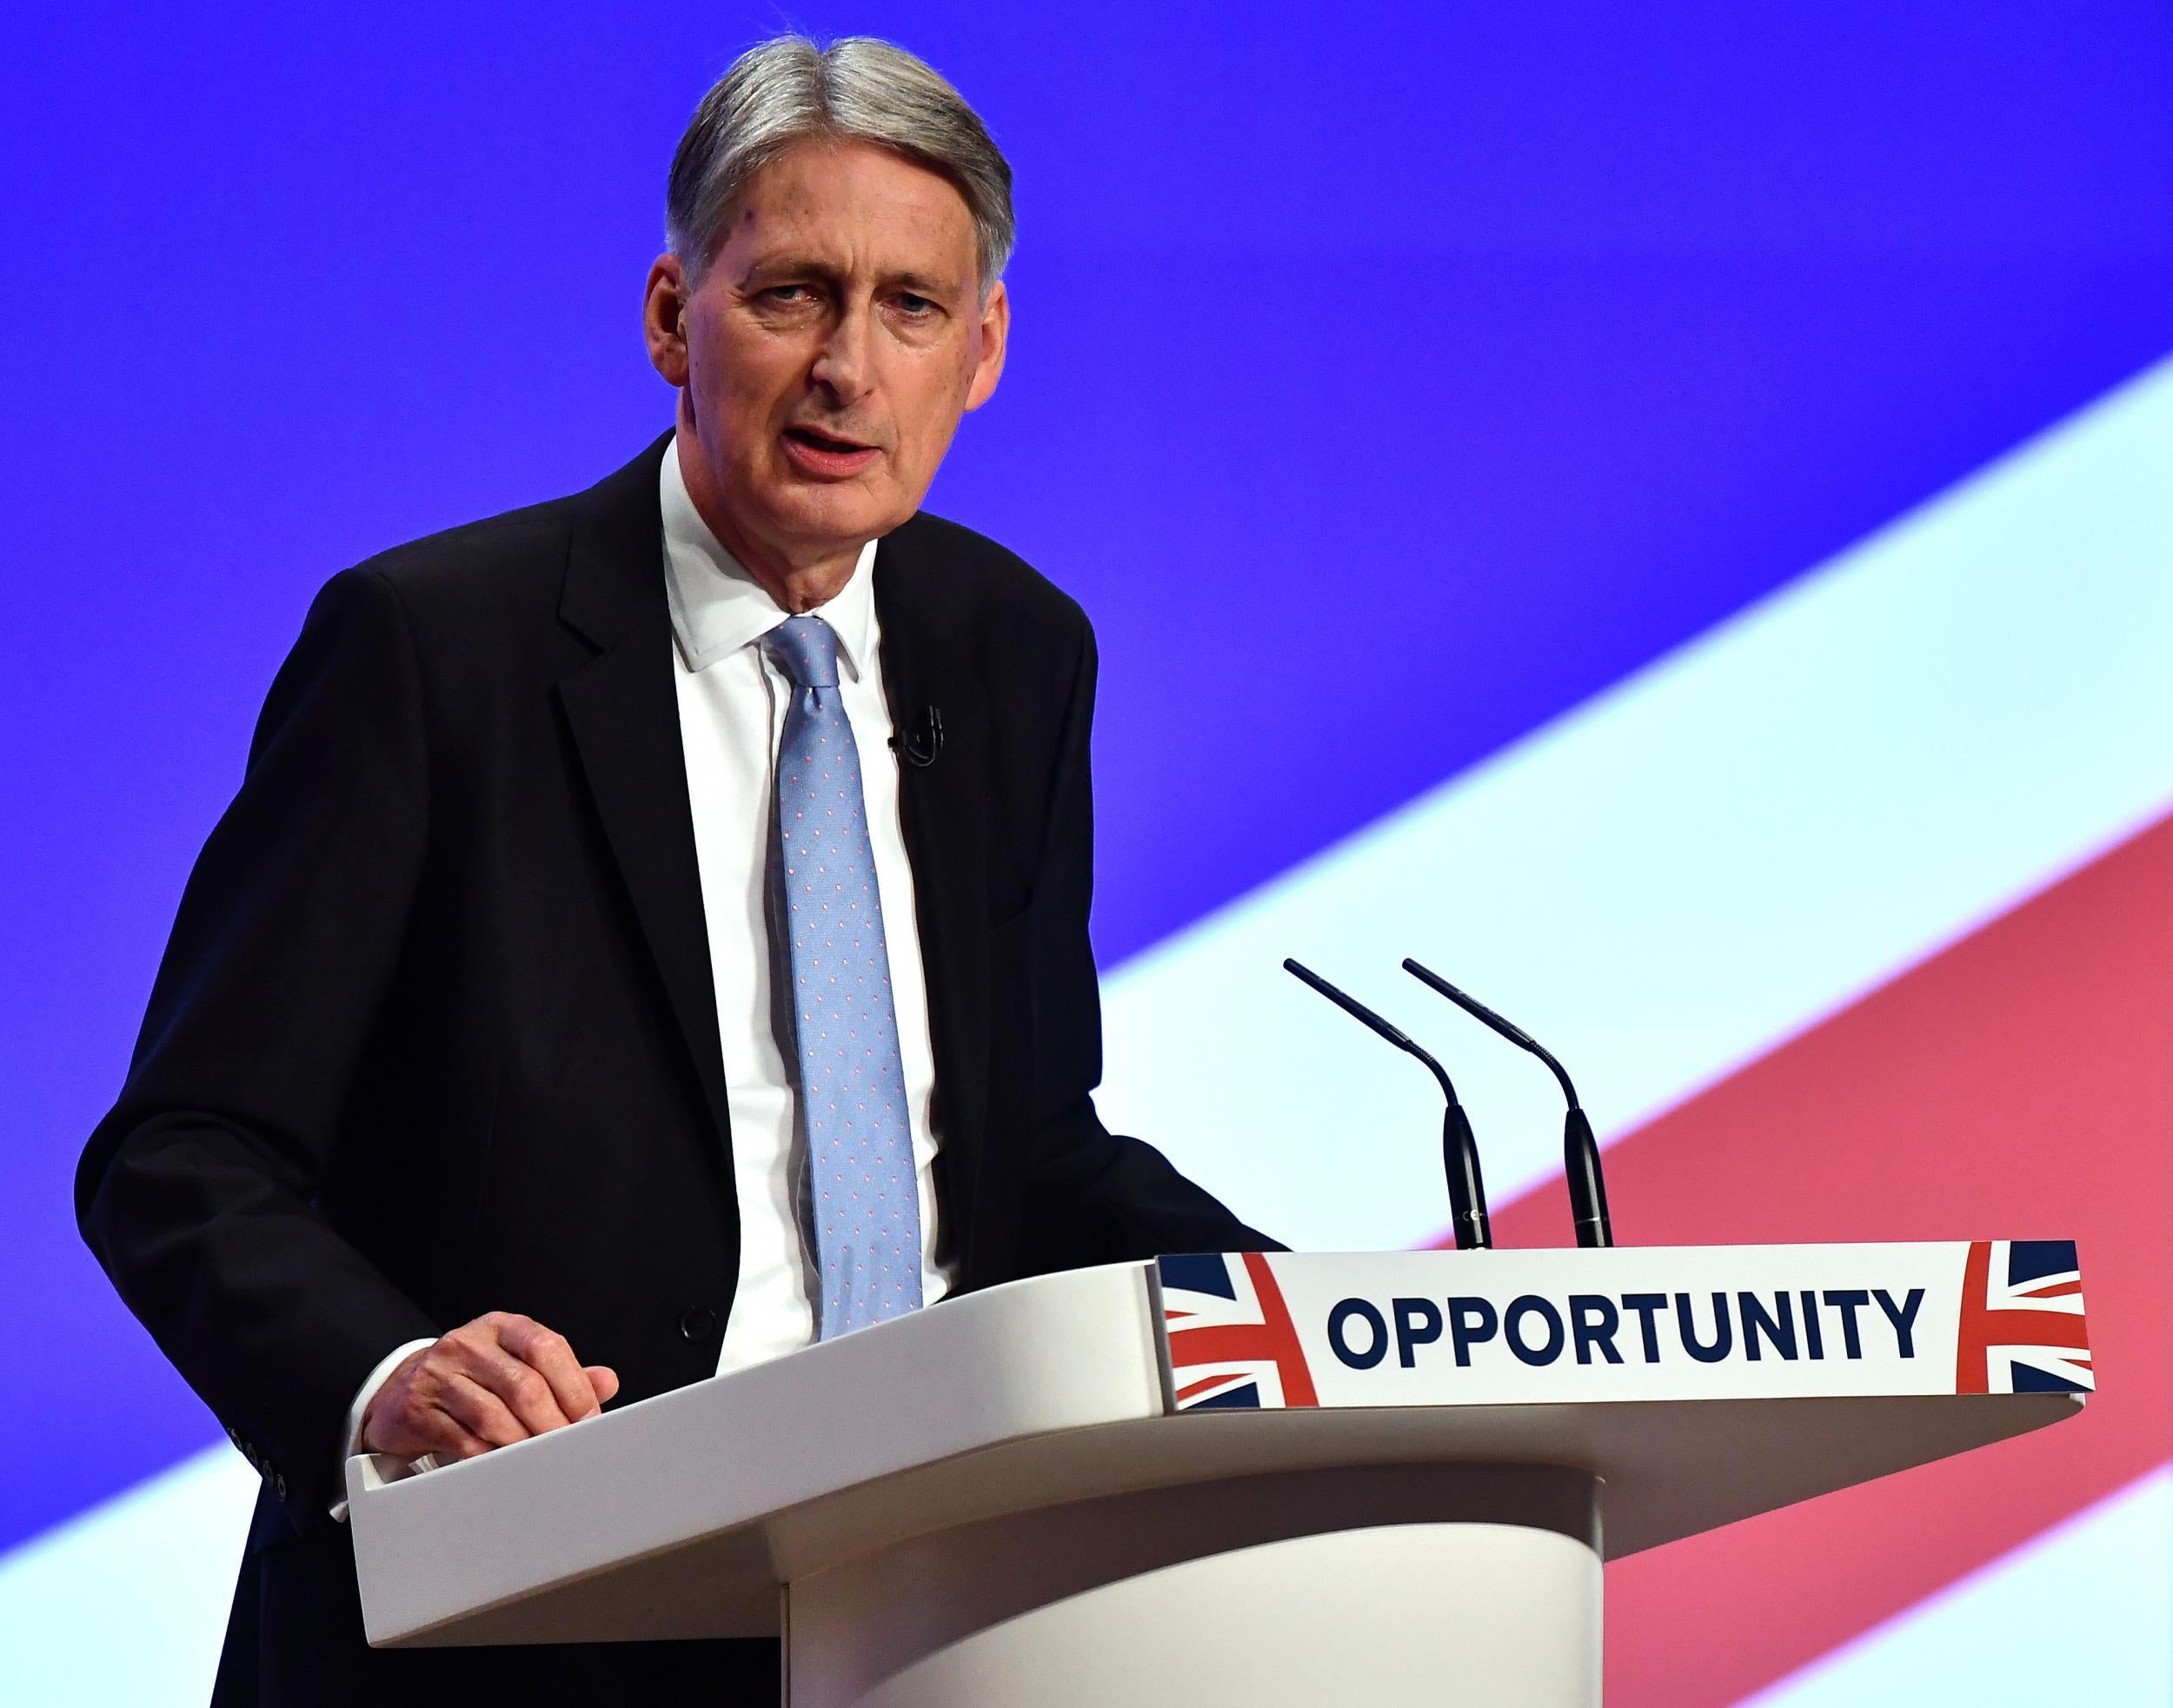 Philip Hammond said people 'they are falling behind' - and that 'the political system doesn’t seem to hear them'